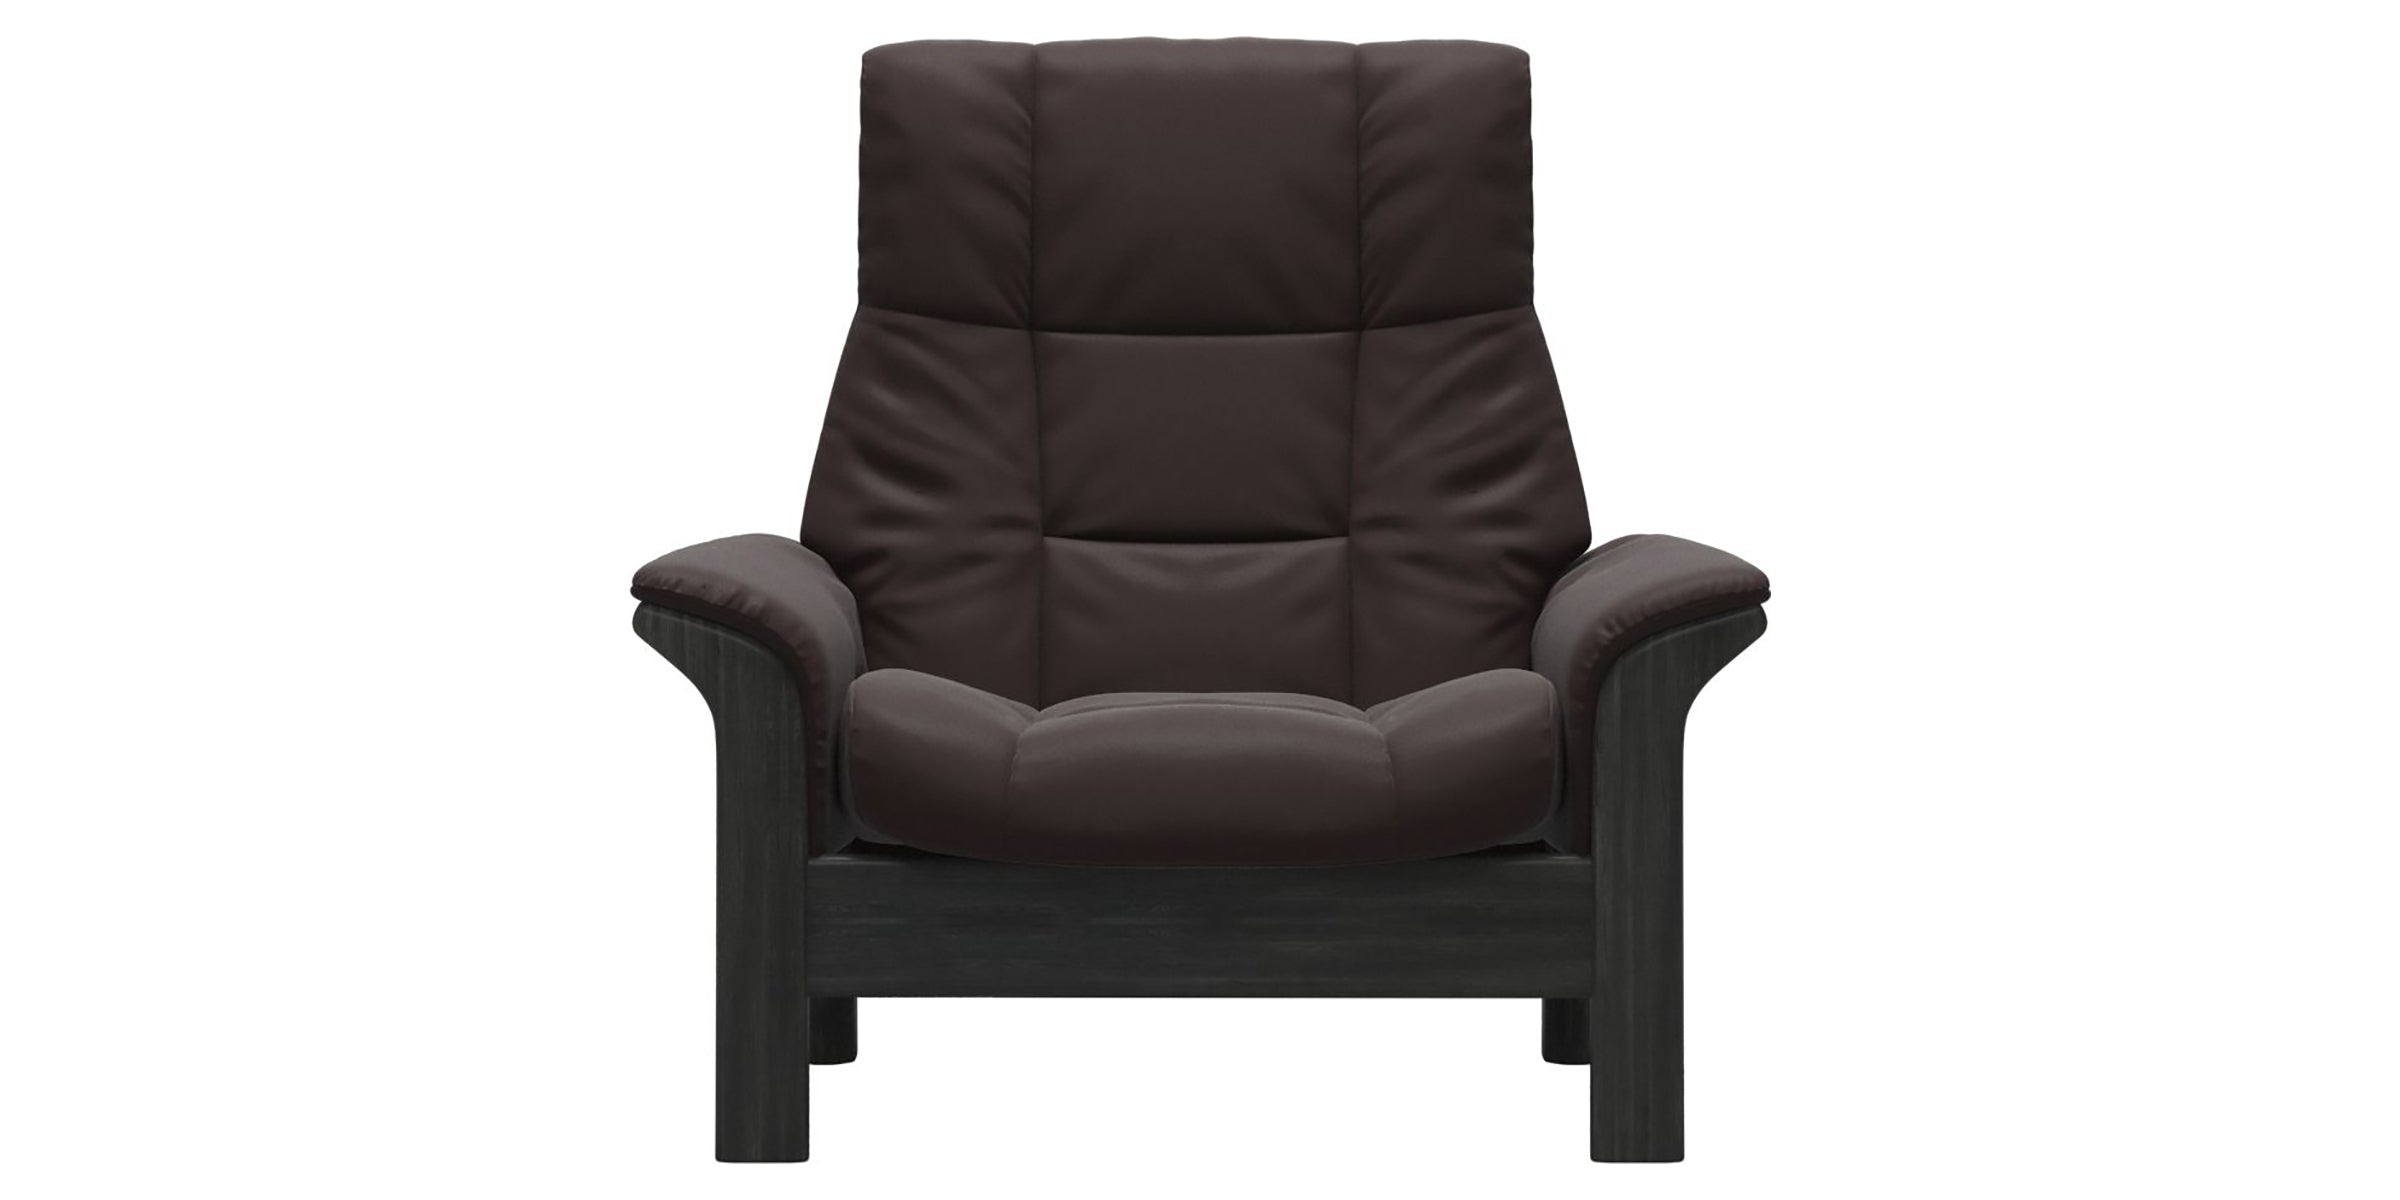 Paloma Leather Chocolate and Grey Base | Stressless Buckingham High Back Chair | Valley Ridge Furniture